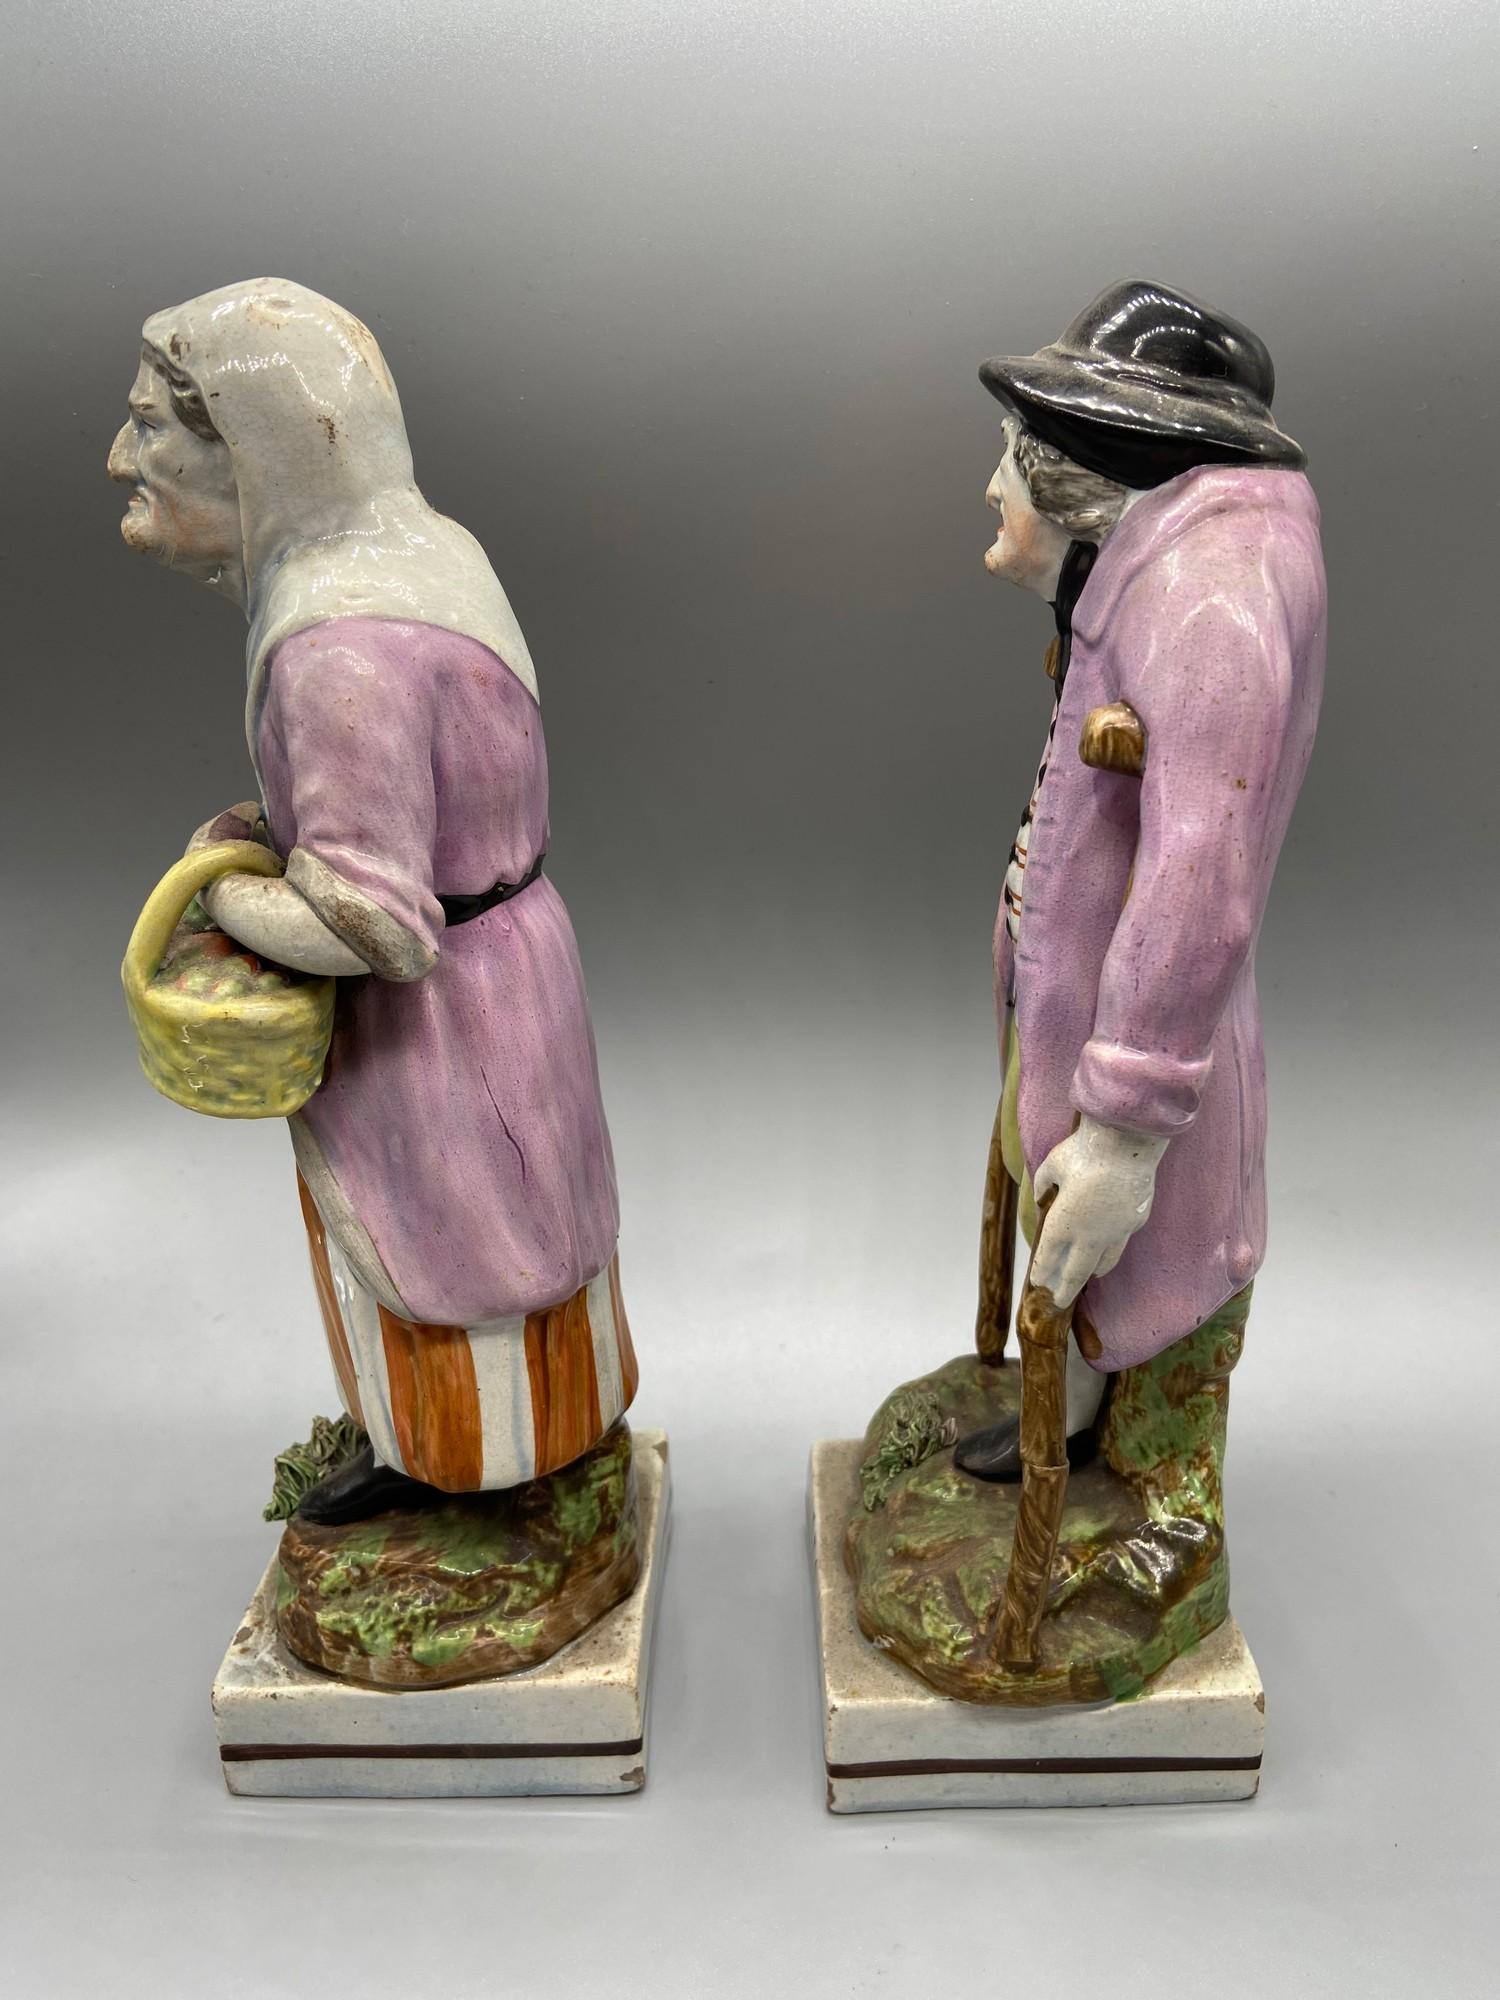 A Pair of Staffordshire Pearl Ware Old Age figurines. [As Found] - Image 2 of 6